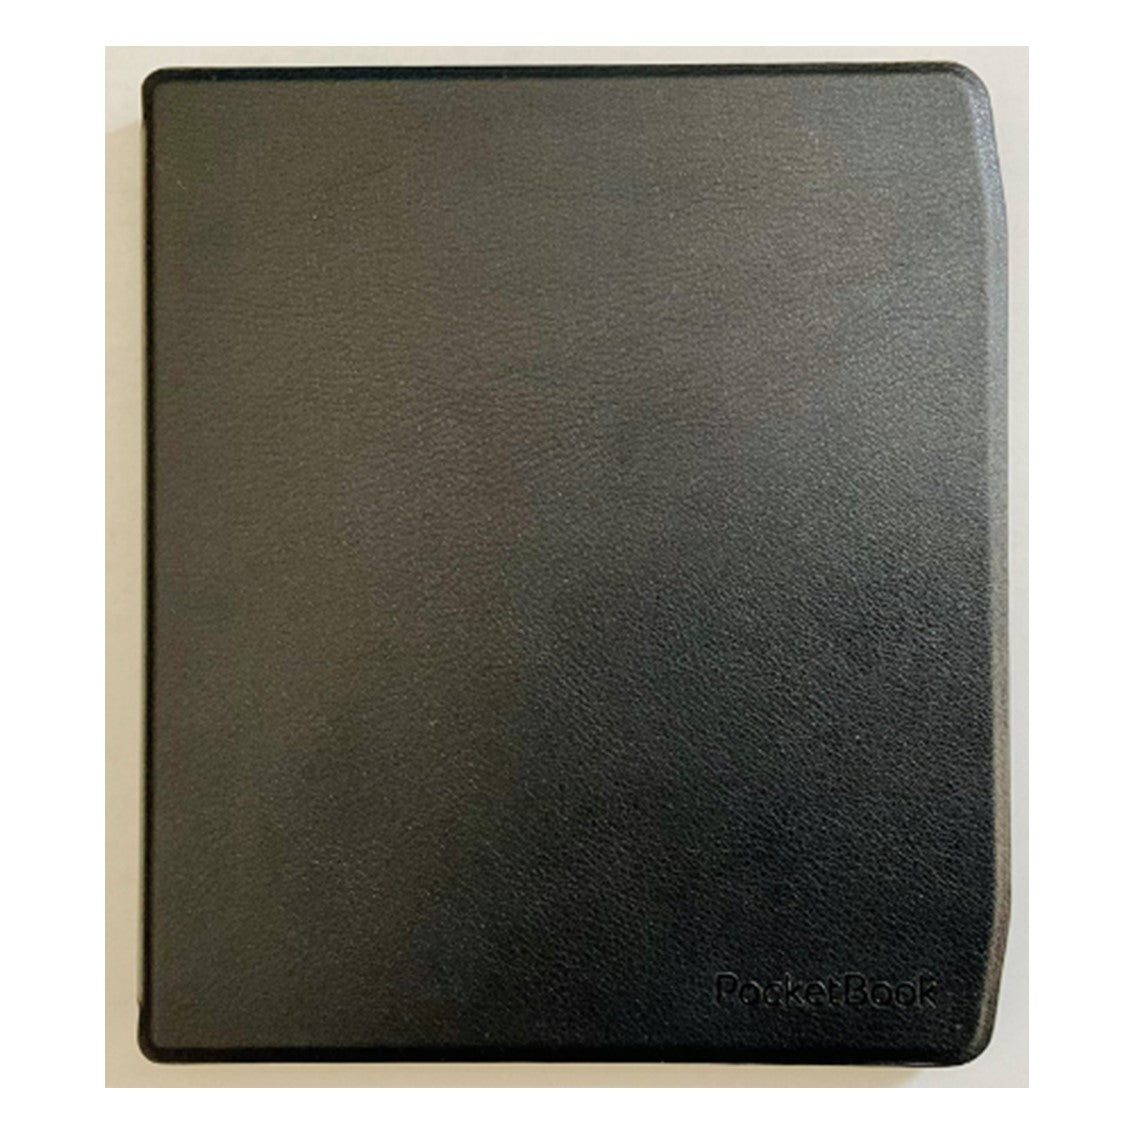 PKB 700 COVER EDITION SHELL NEGRO